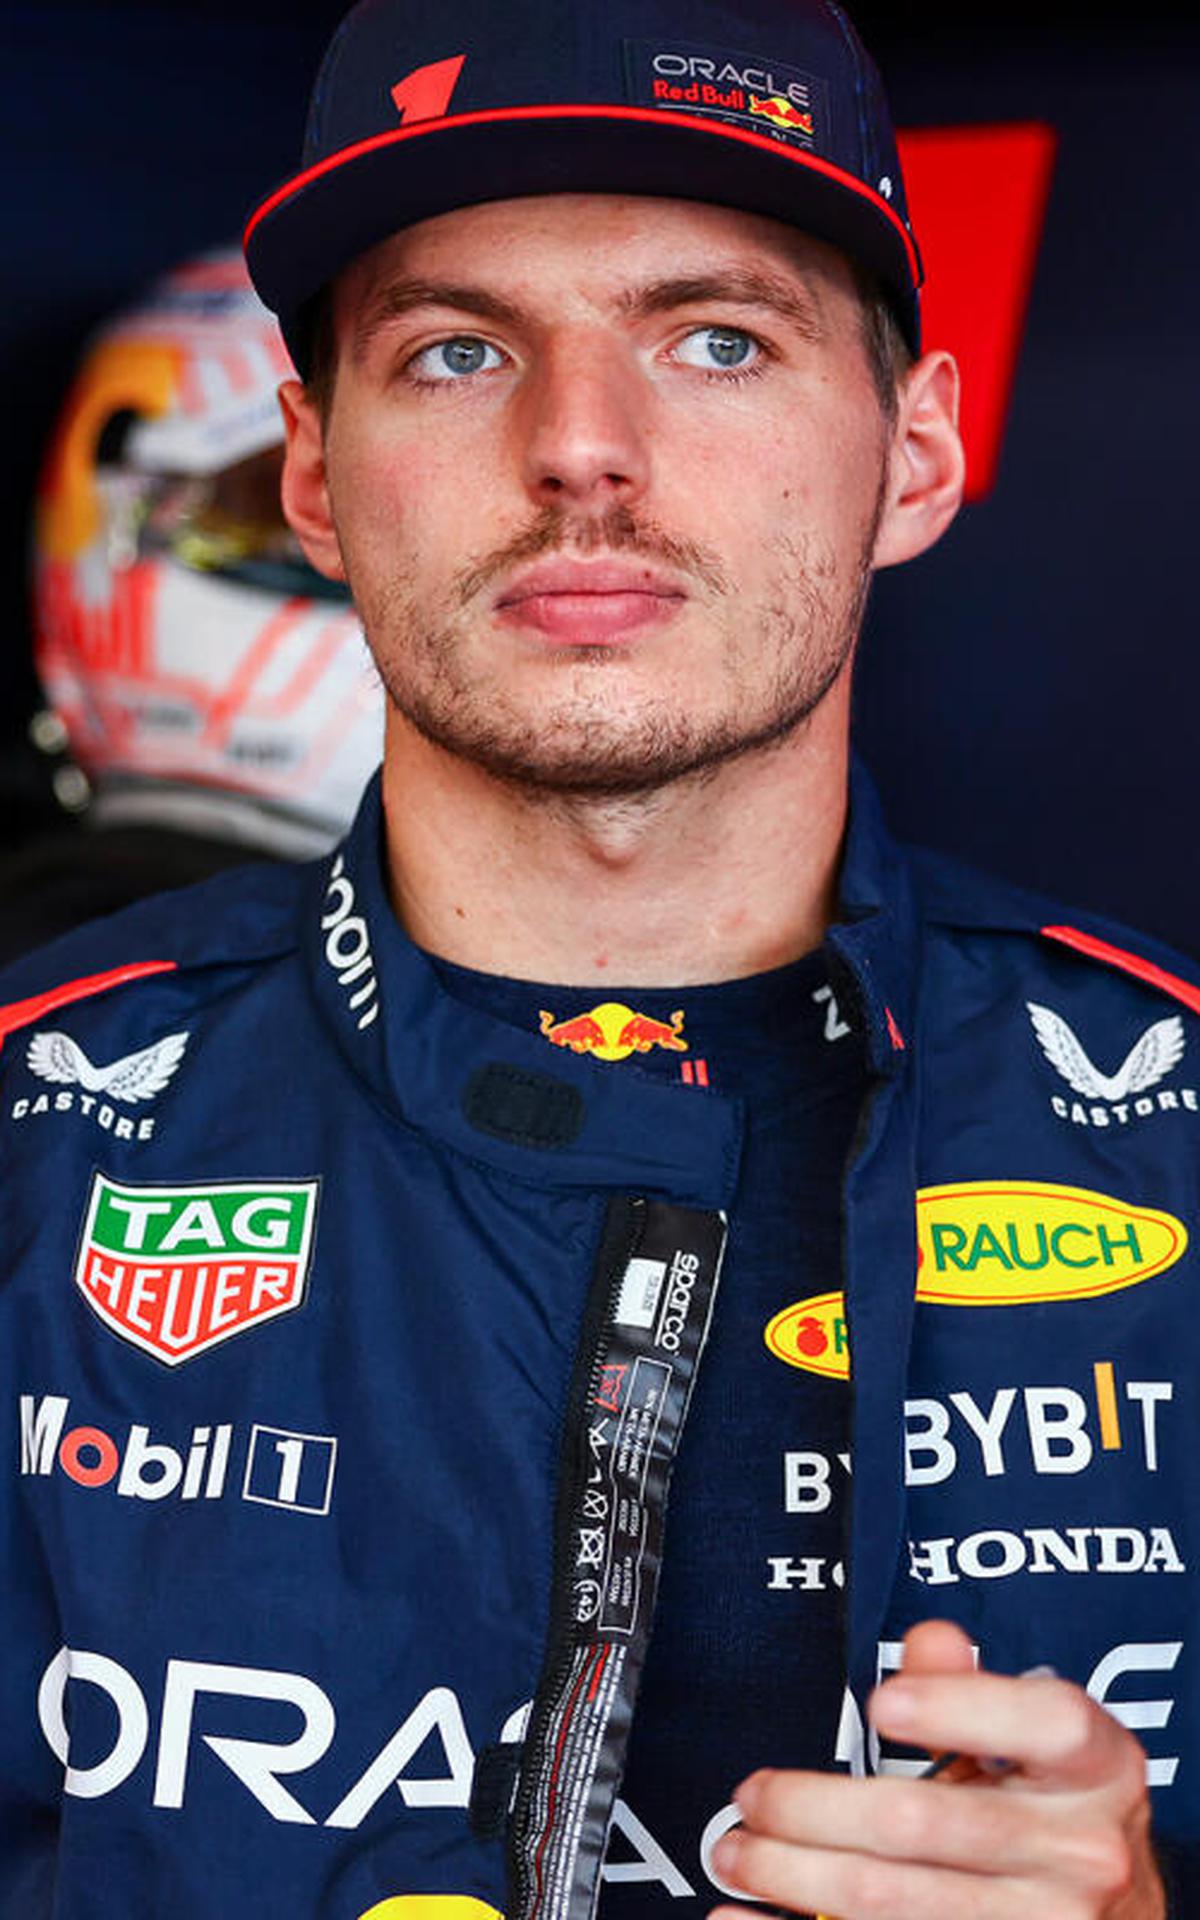 F1 - Max Verstappen wins in Japan to seal sixth Constructors